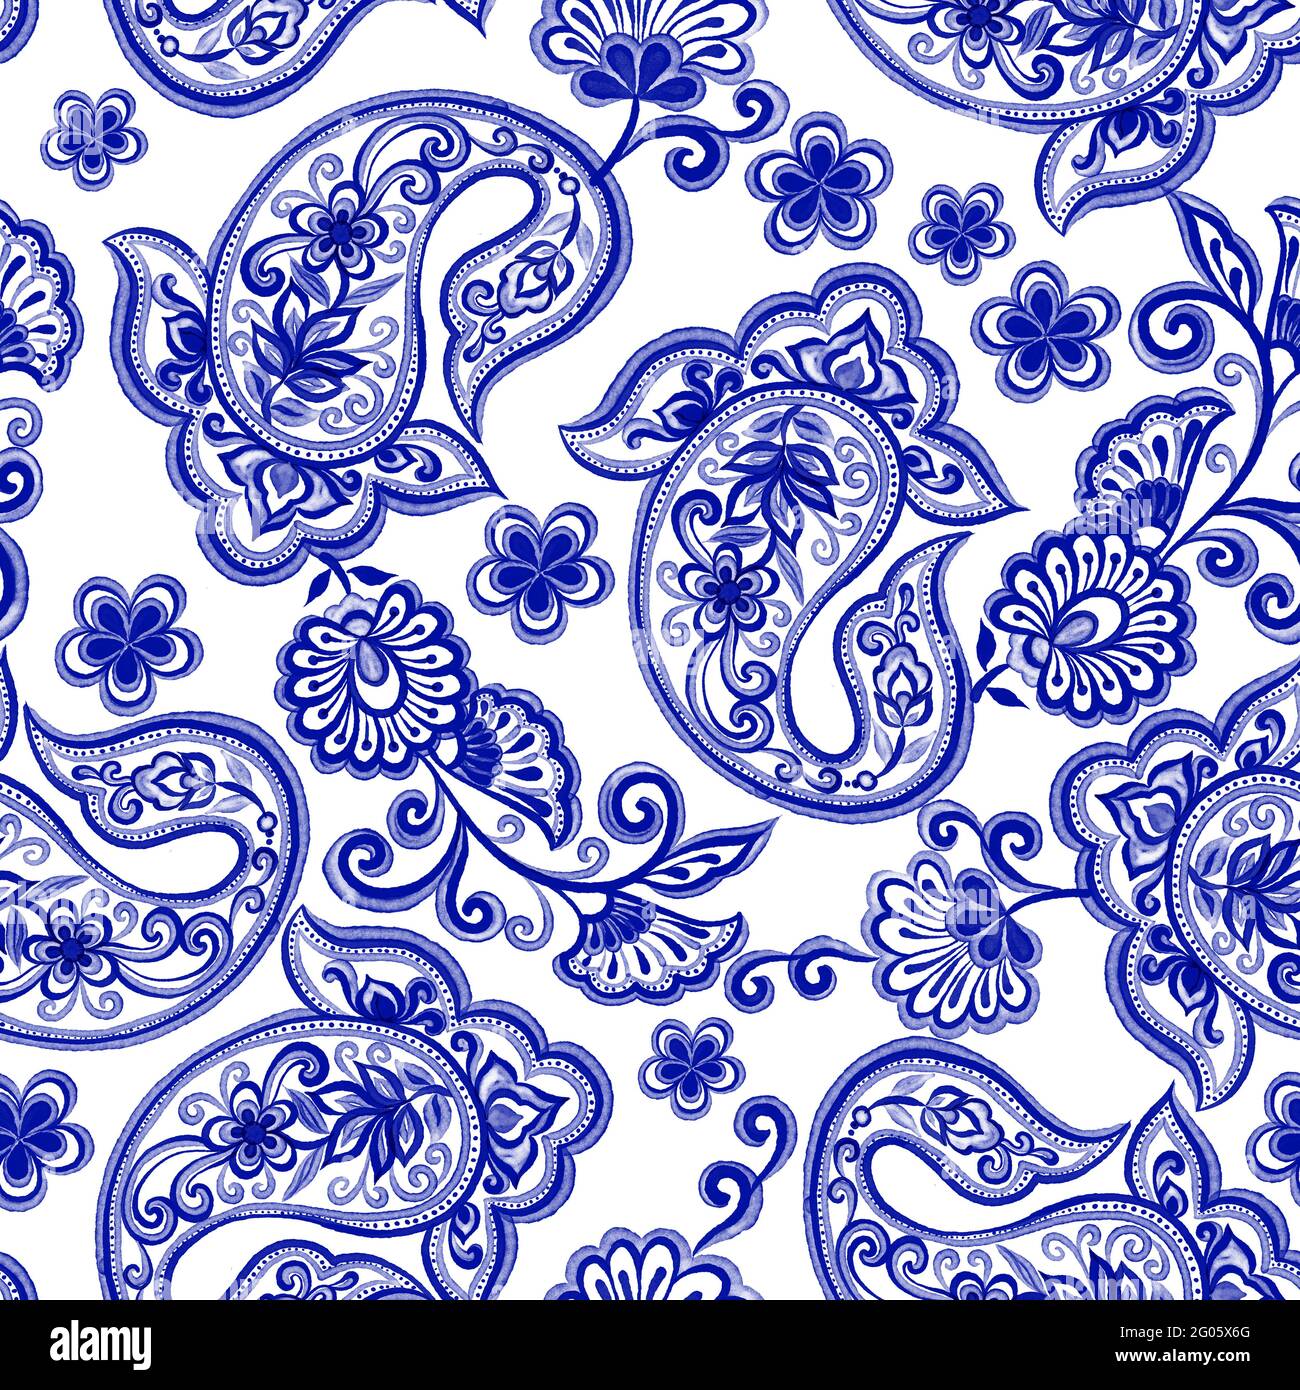 Seamless blue paisley pattern watercolor element over white background. Watercolor leaves tribal asian style decorative graphic background. Stock Photo